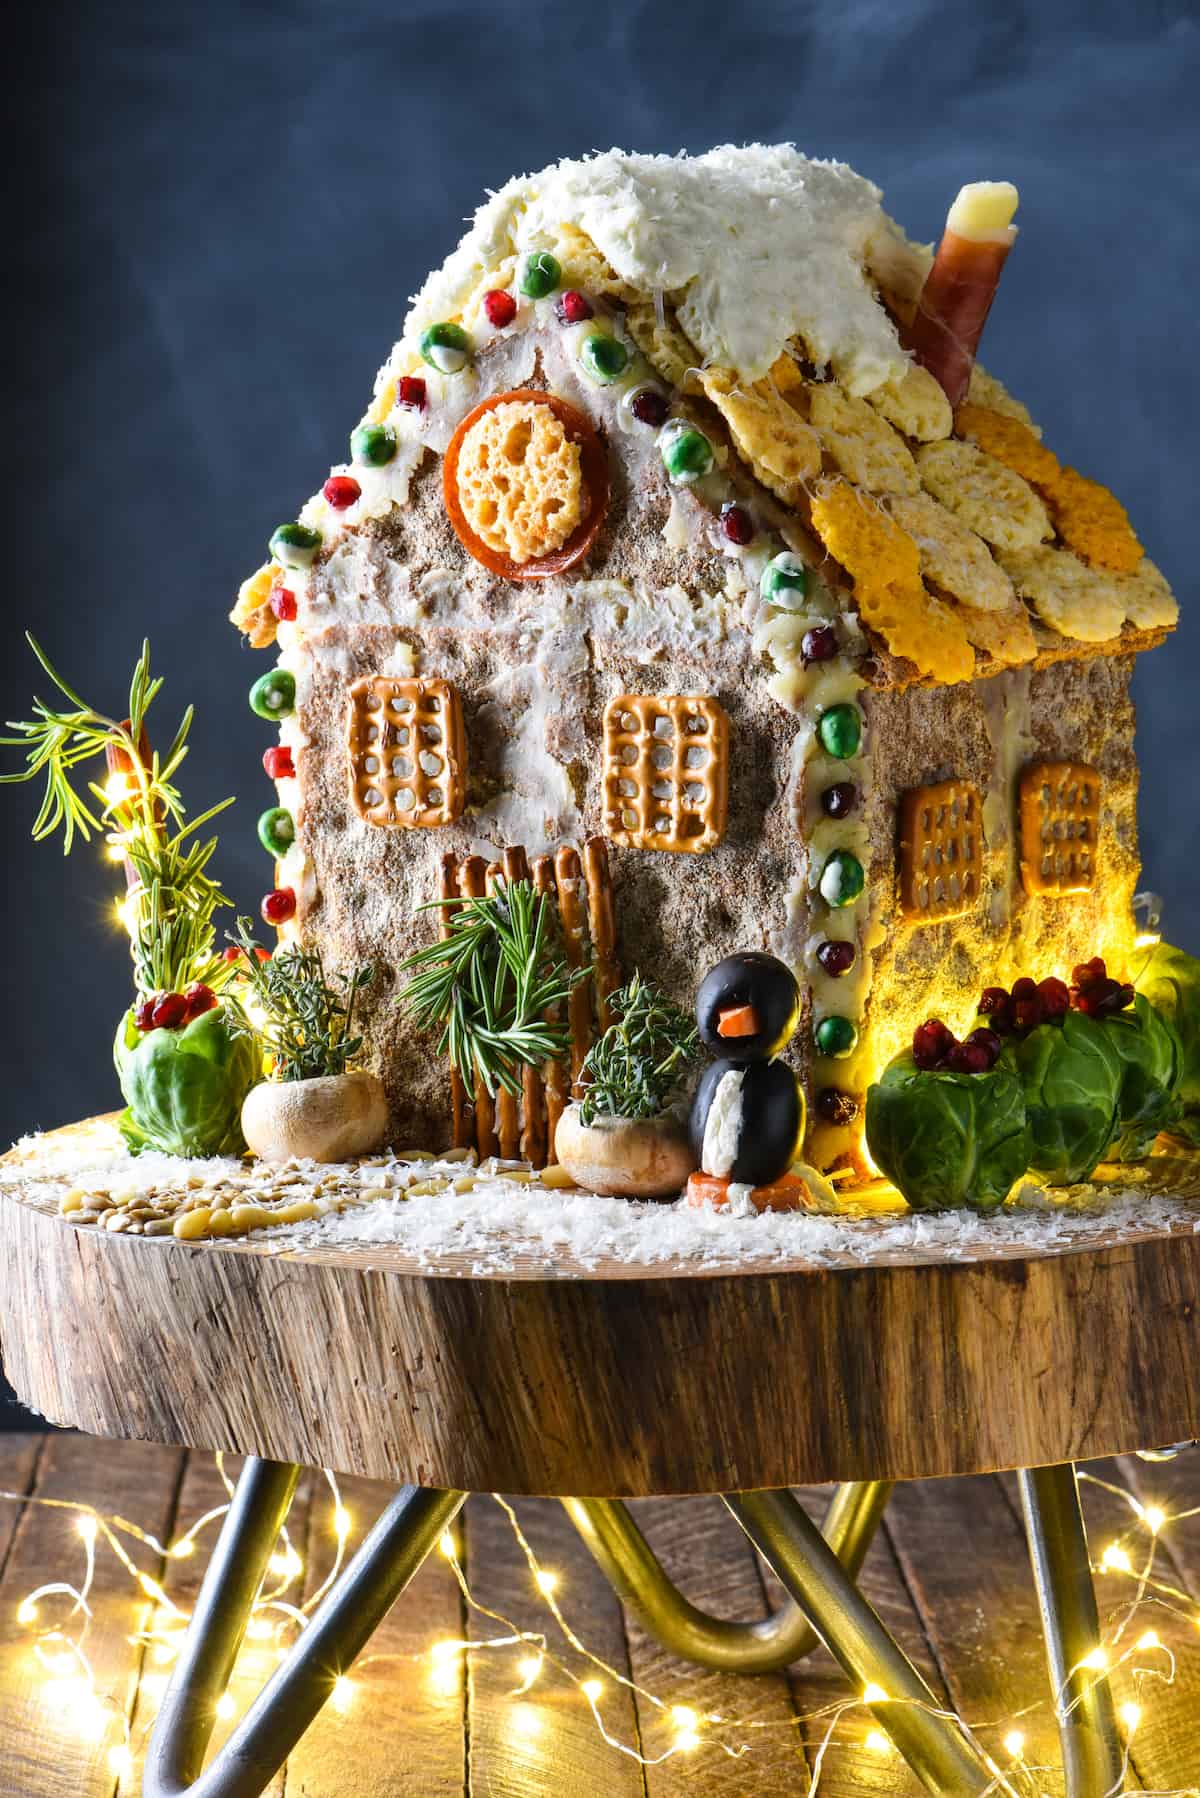 A savory gingerbread house (charcuterie chalet) on a wooden stand, with holiday lights decorating the scene.